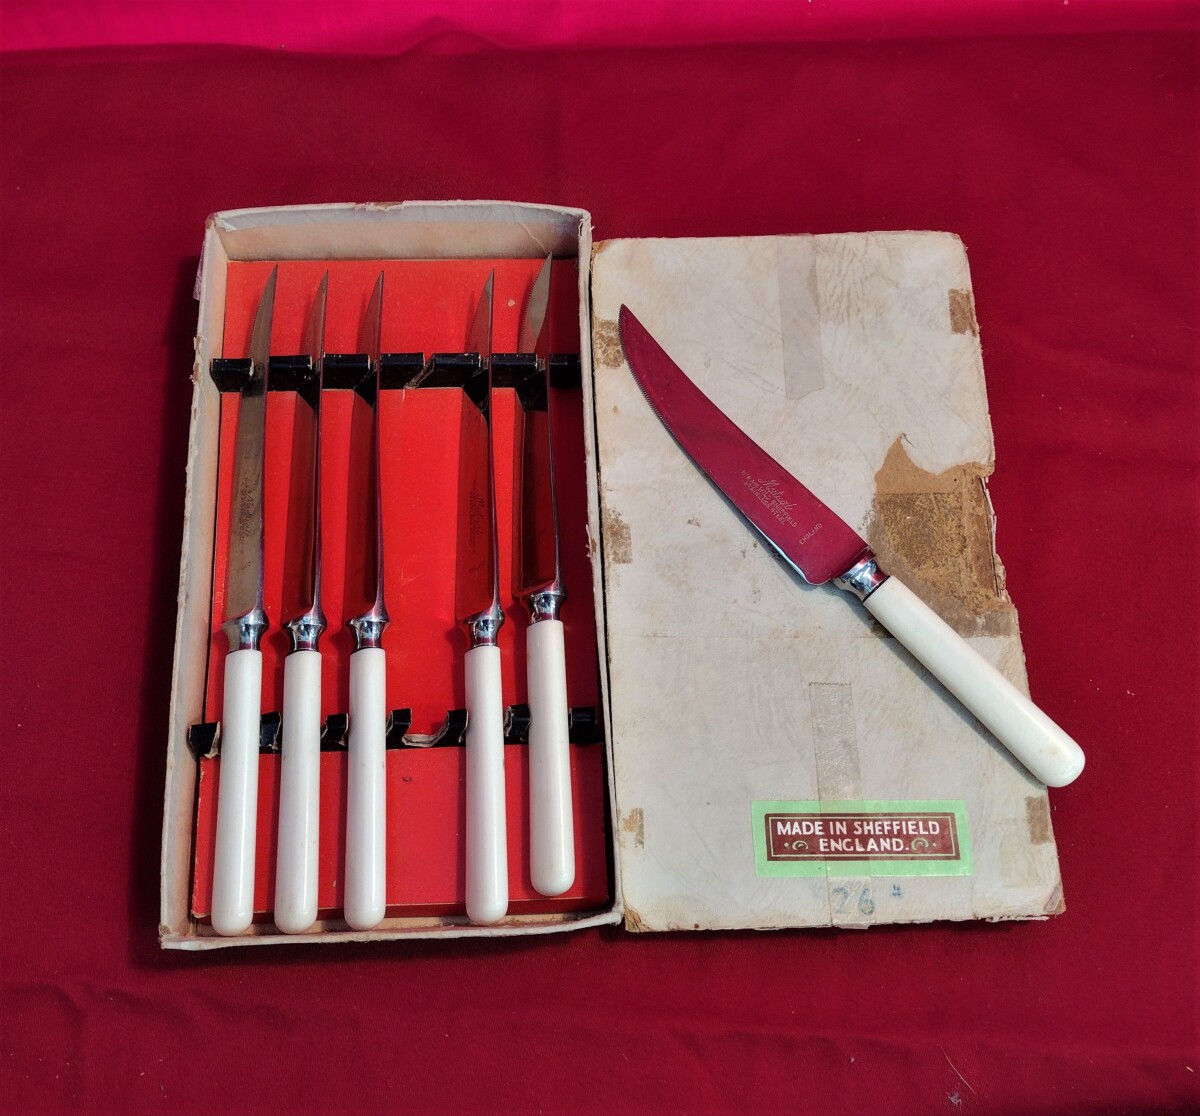 Knives for Sale at Online Auction